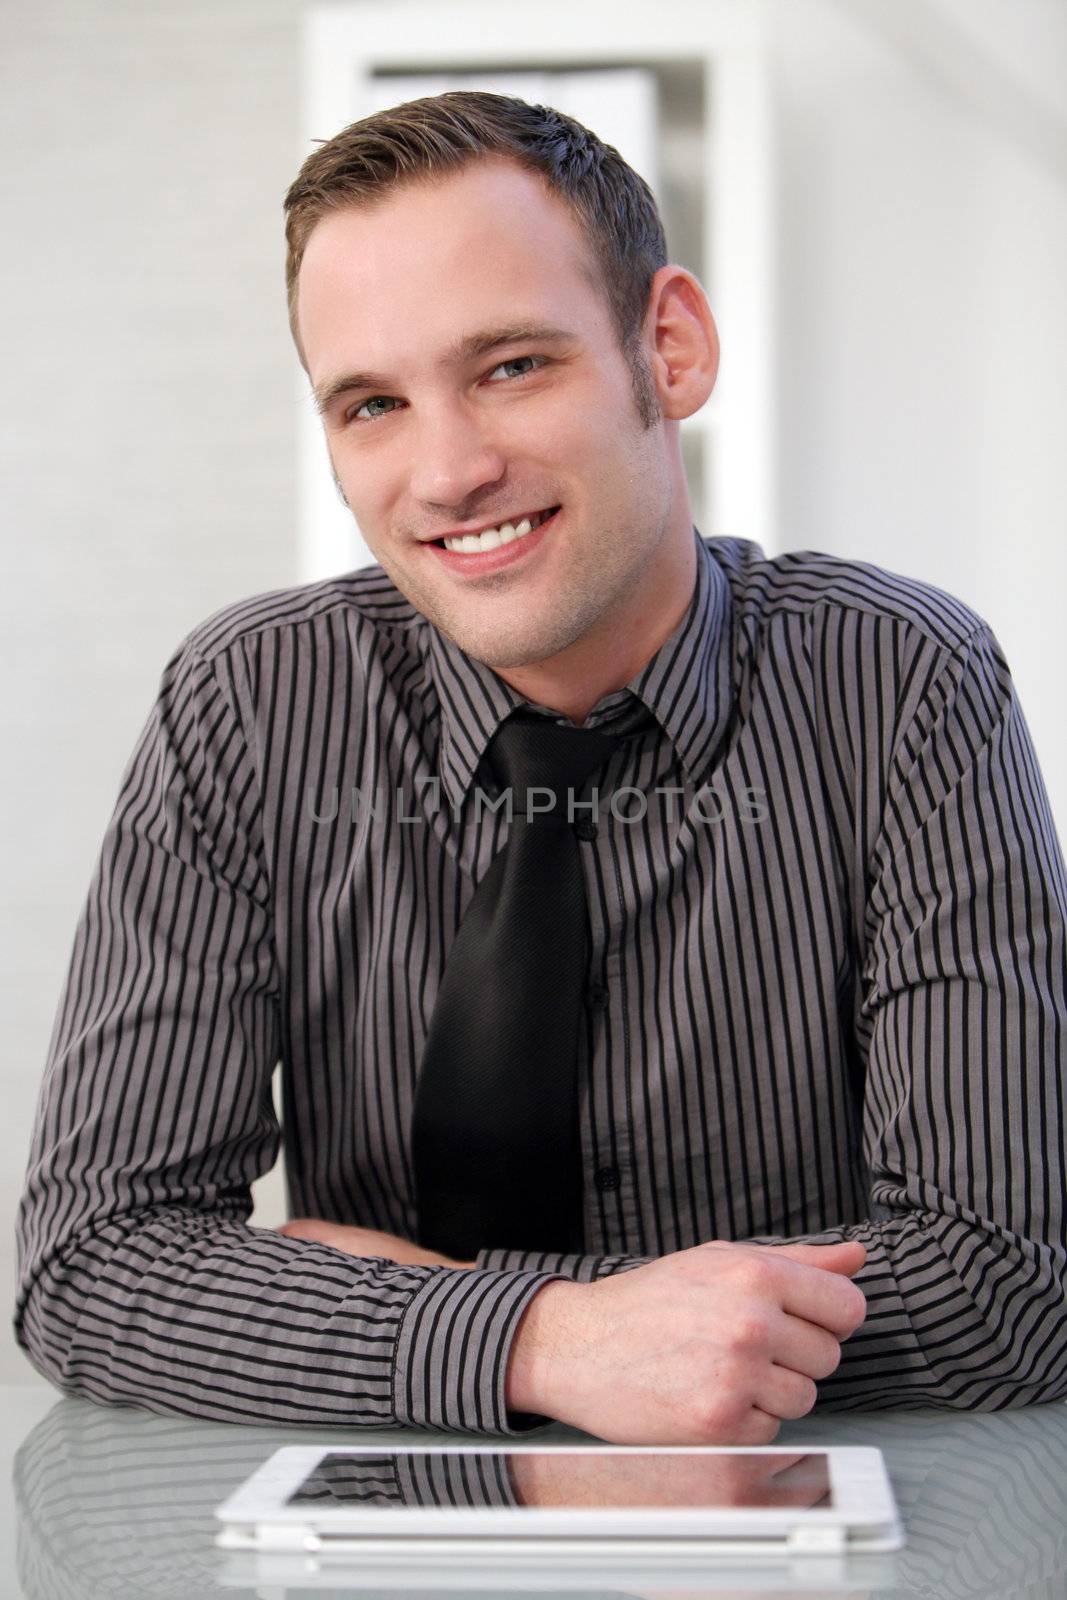 Successful happy man sitting at his desk with a tablet in front of him smiling at the camera